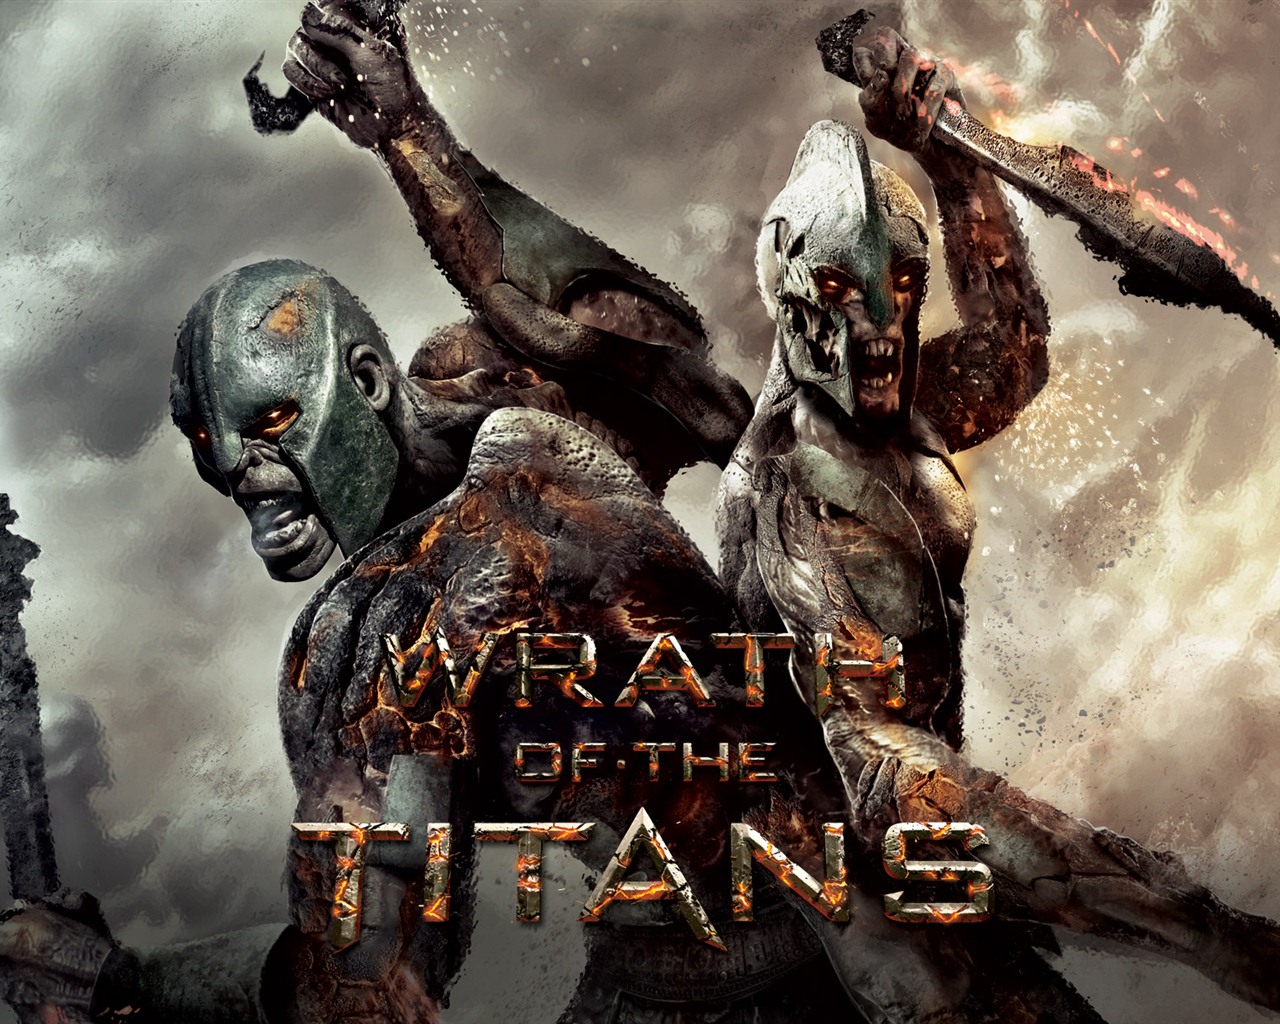 Wrath of the Titans HD wallpapers #6 - 1280x1024